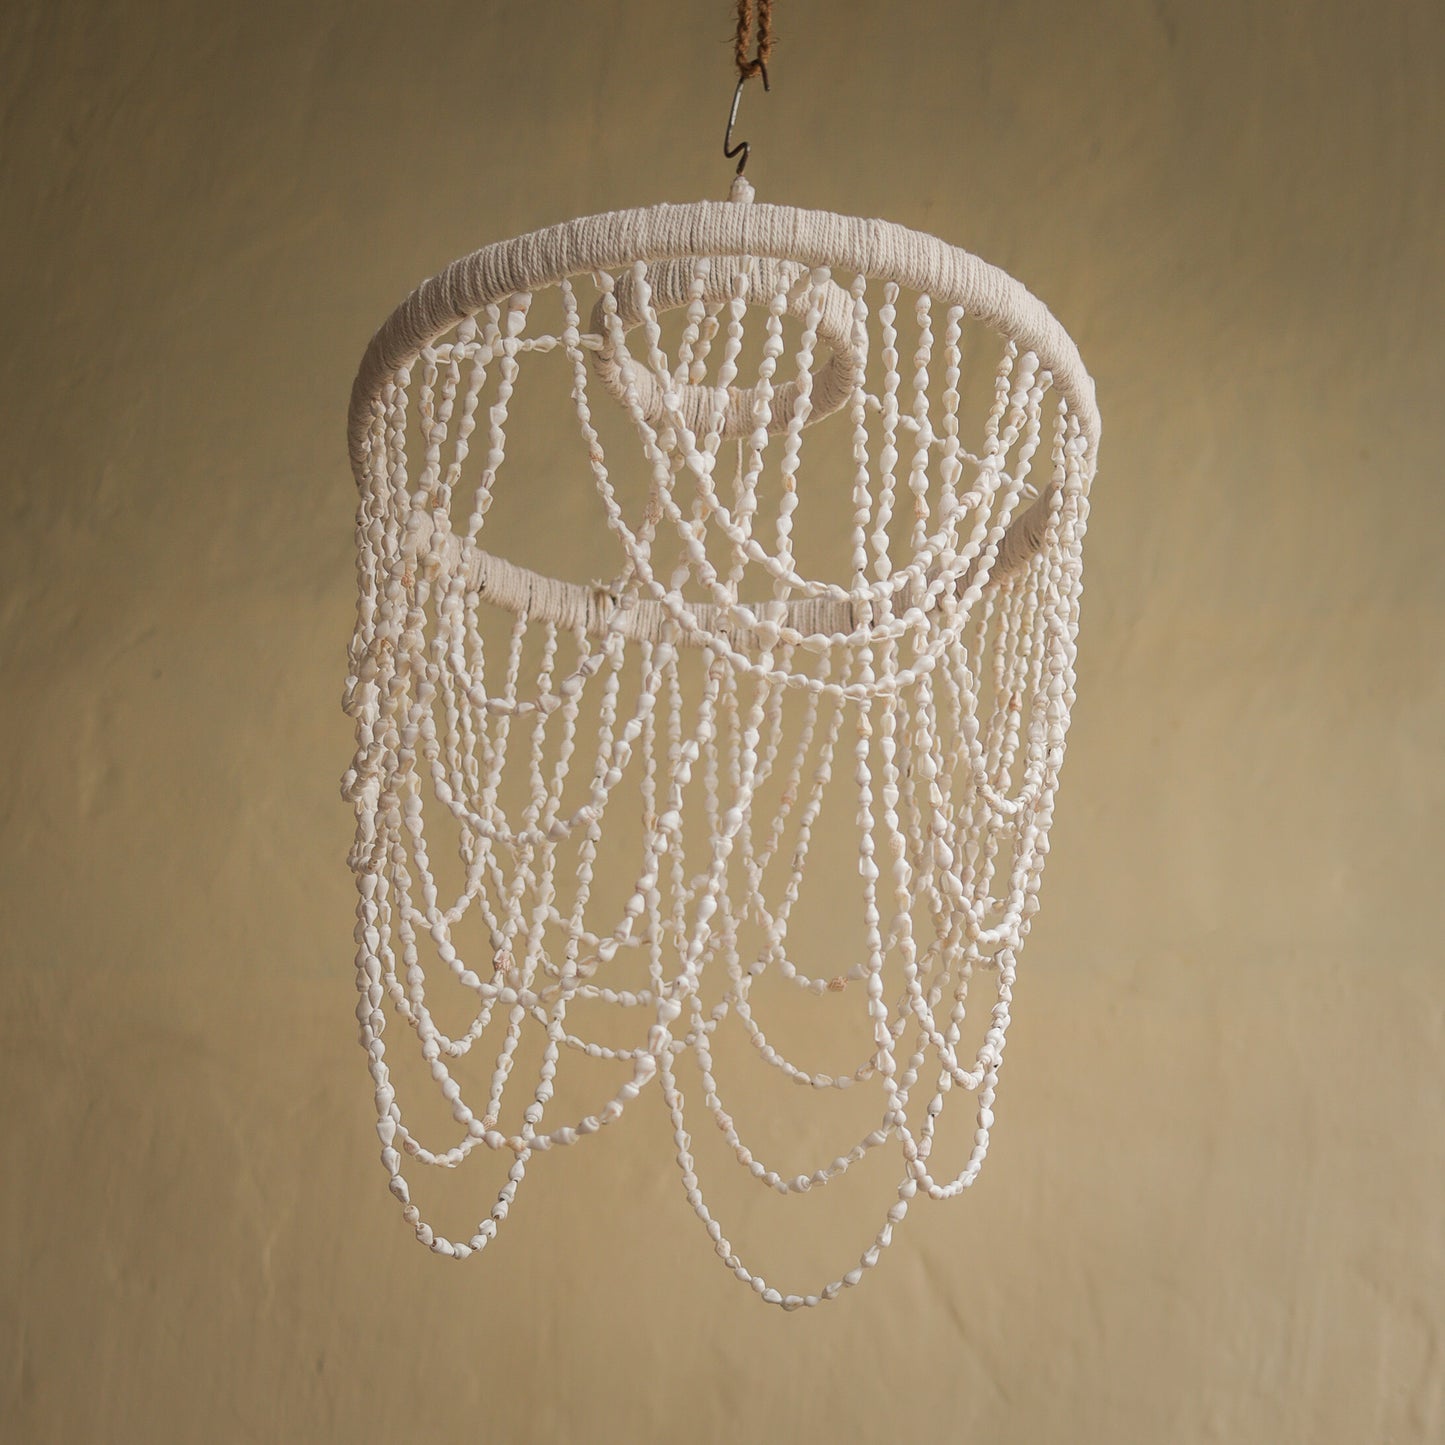 Shell Shade Chandelier